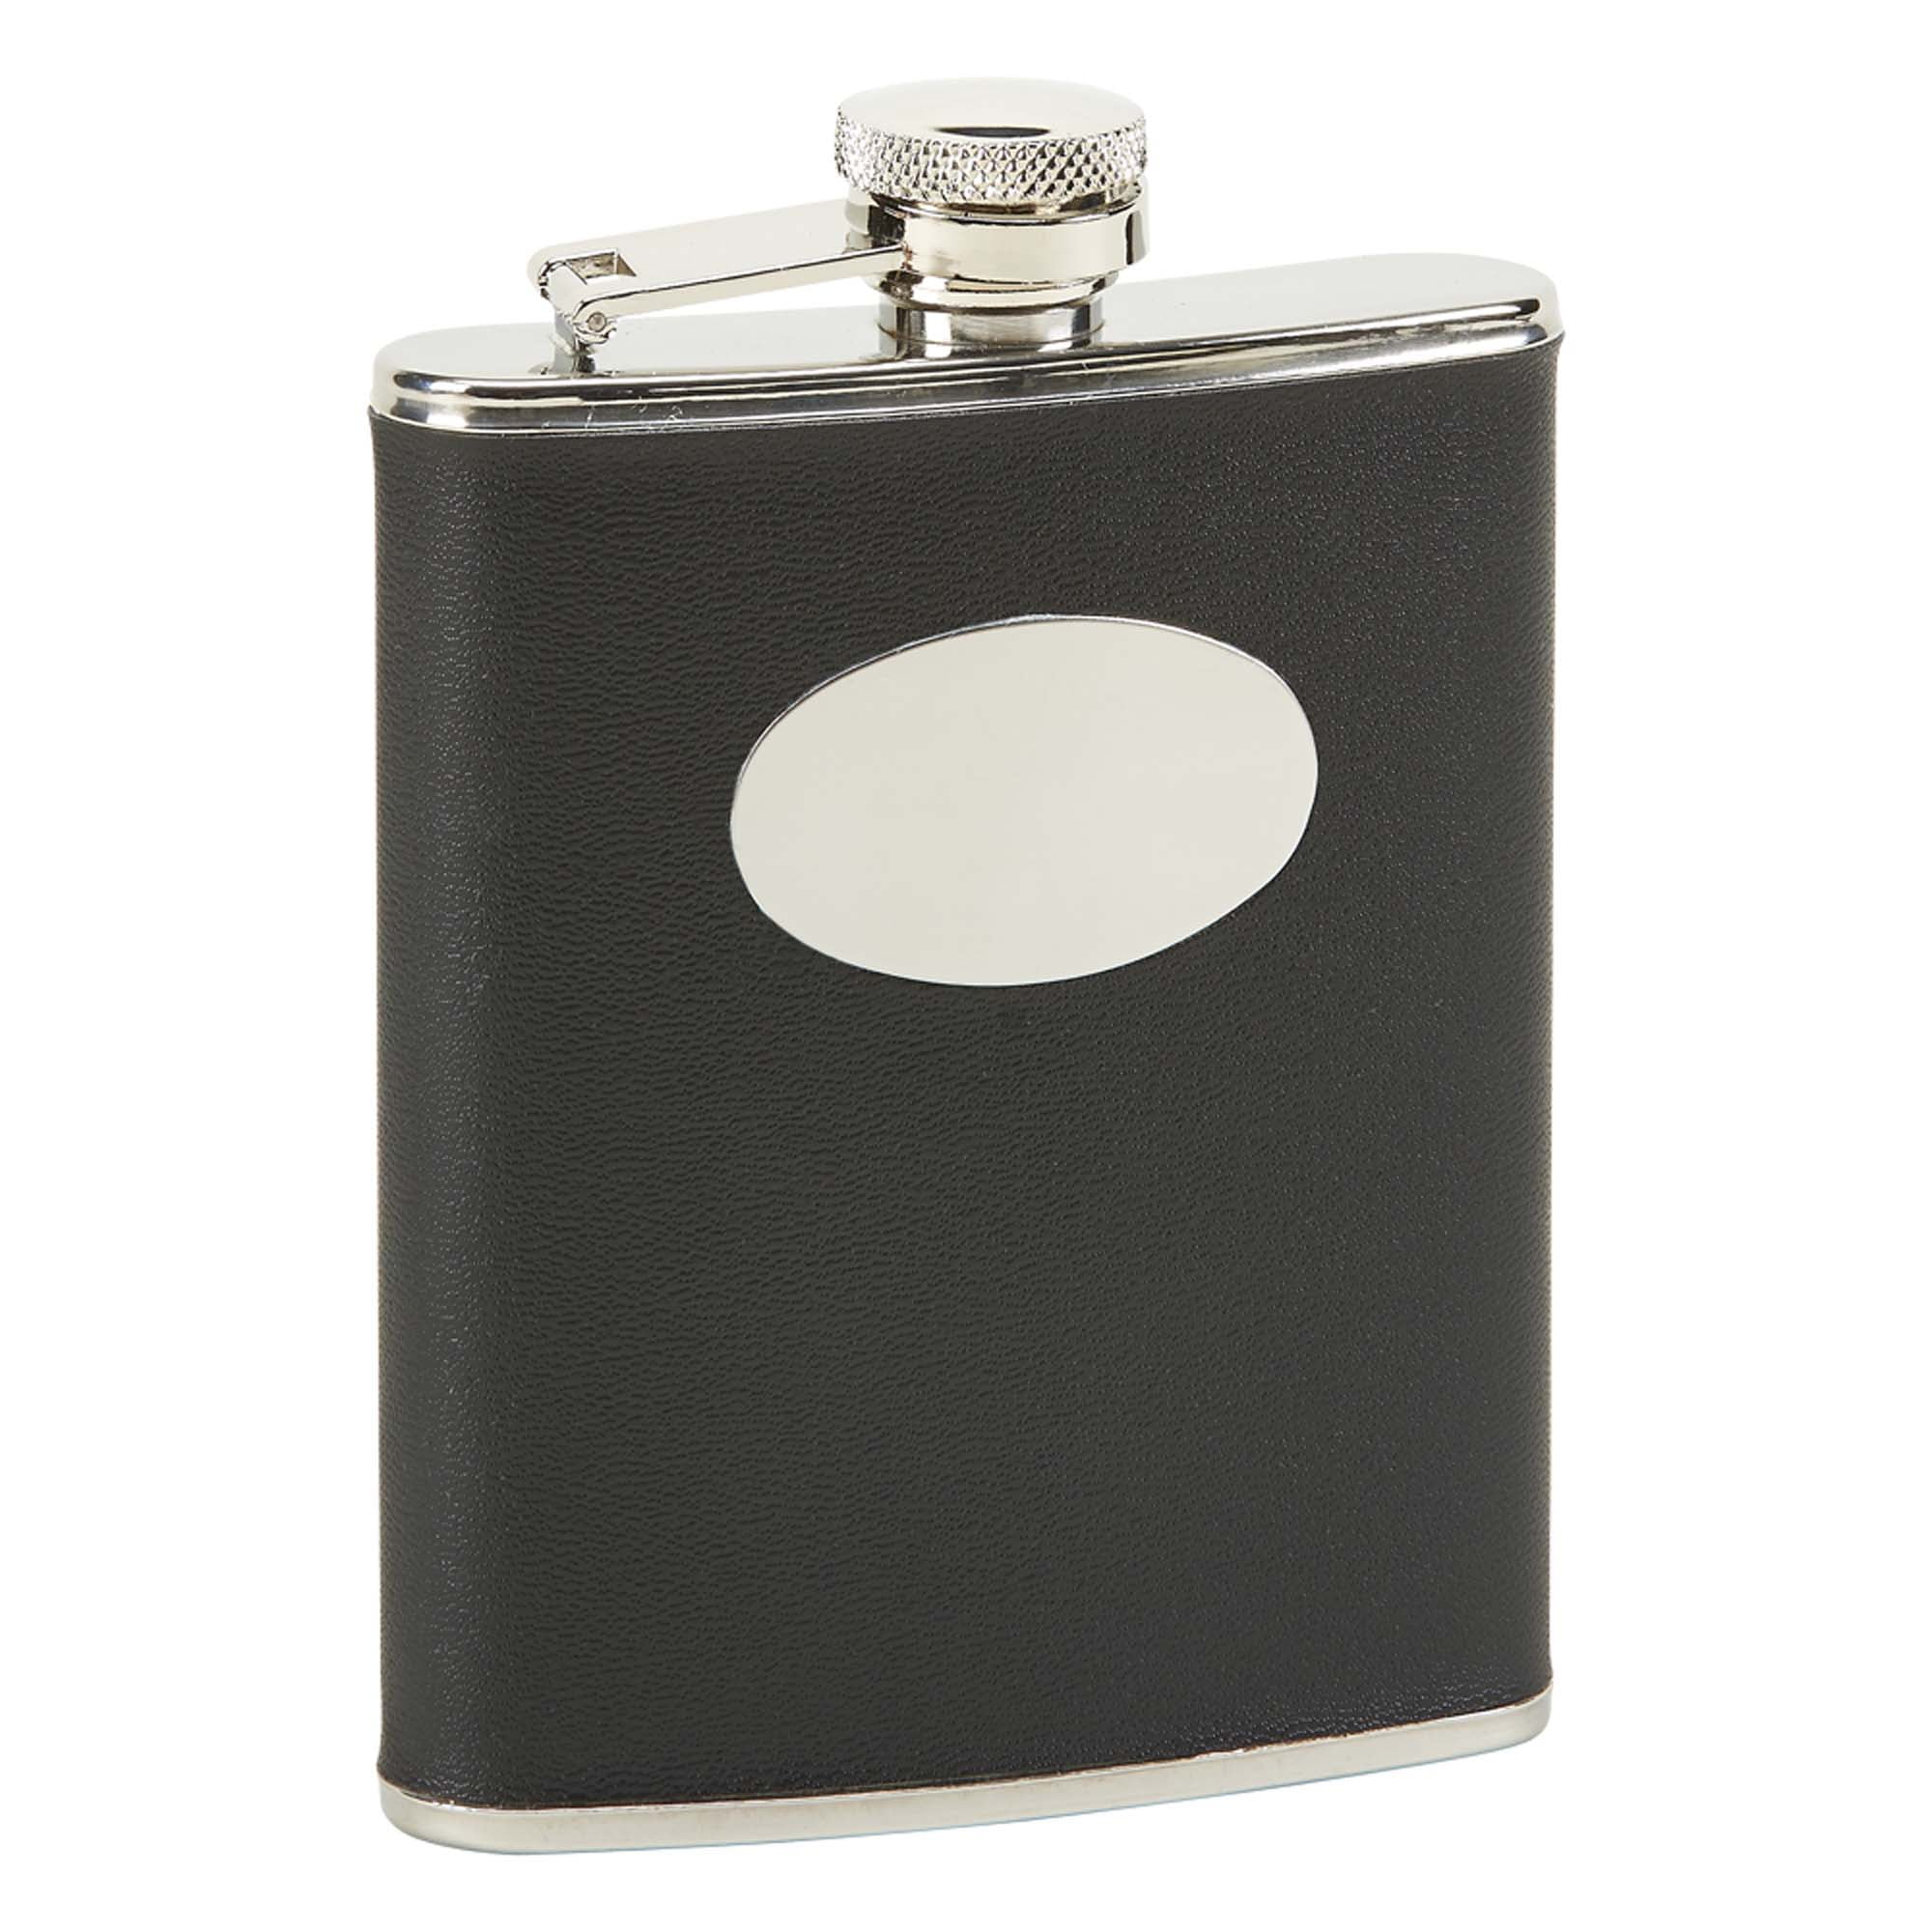 003100 6 Oz Stainless Steel Flask With Engraving Plate - Black